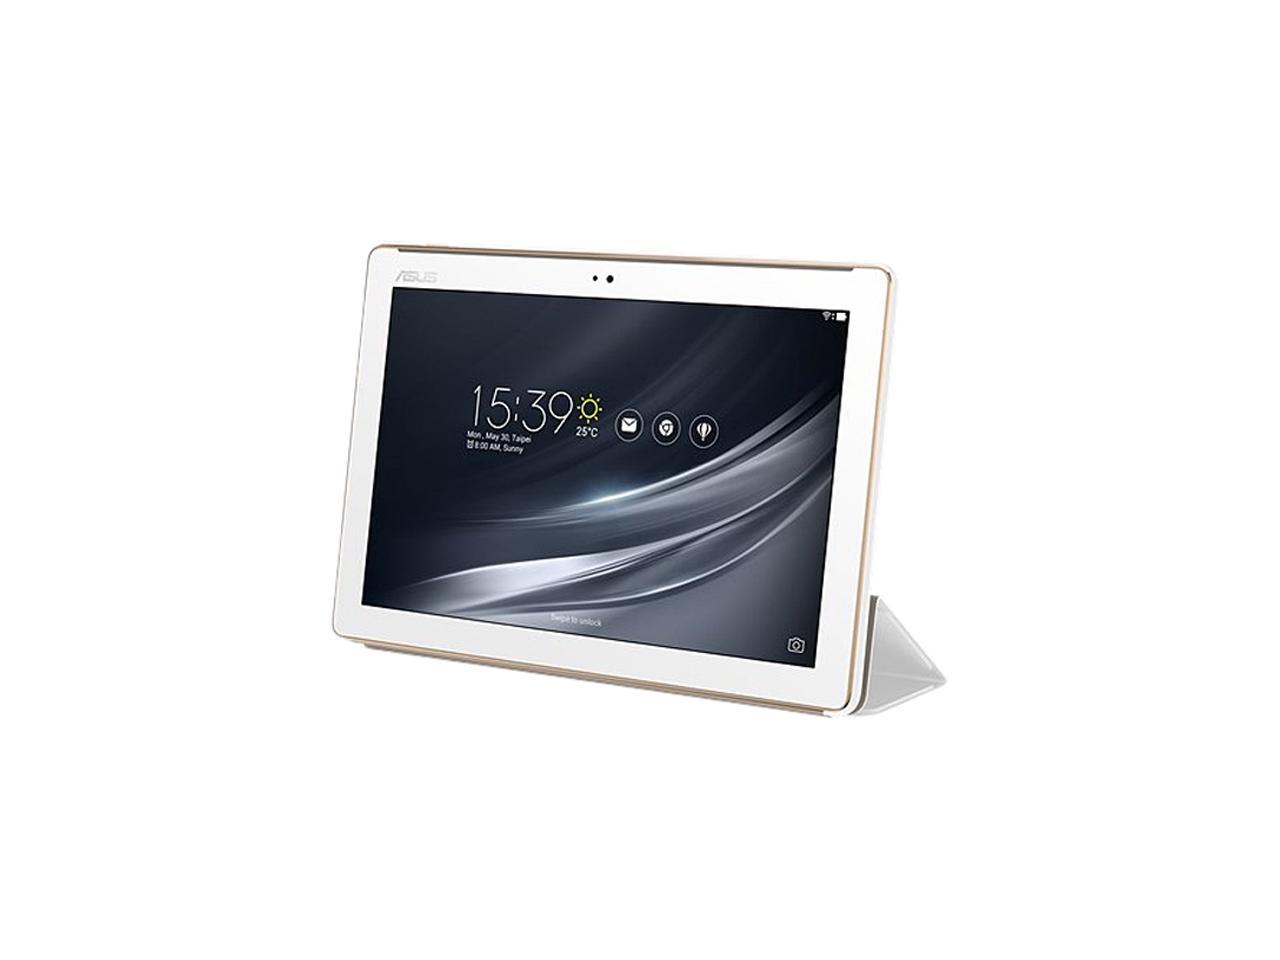 ASUS ZenPad 10 Z301M-A2-WH MTK MT8163B (1.30 GHz) 2 LPDDR3 Memory 16 GB eMMC 10.1" 1280 x 800 Tablet Android 7.0 (Nougat) Pearl White - Newegg.com